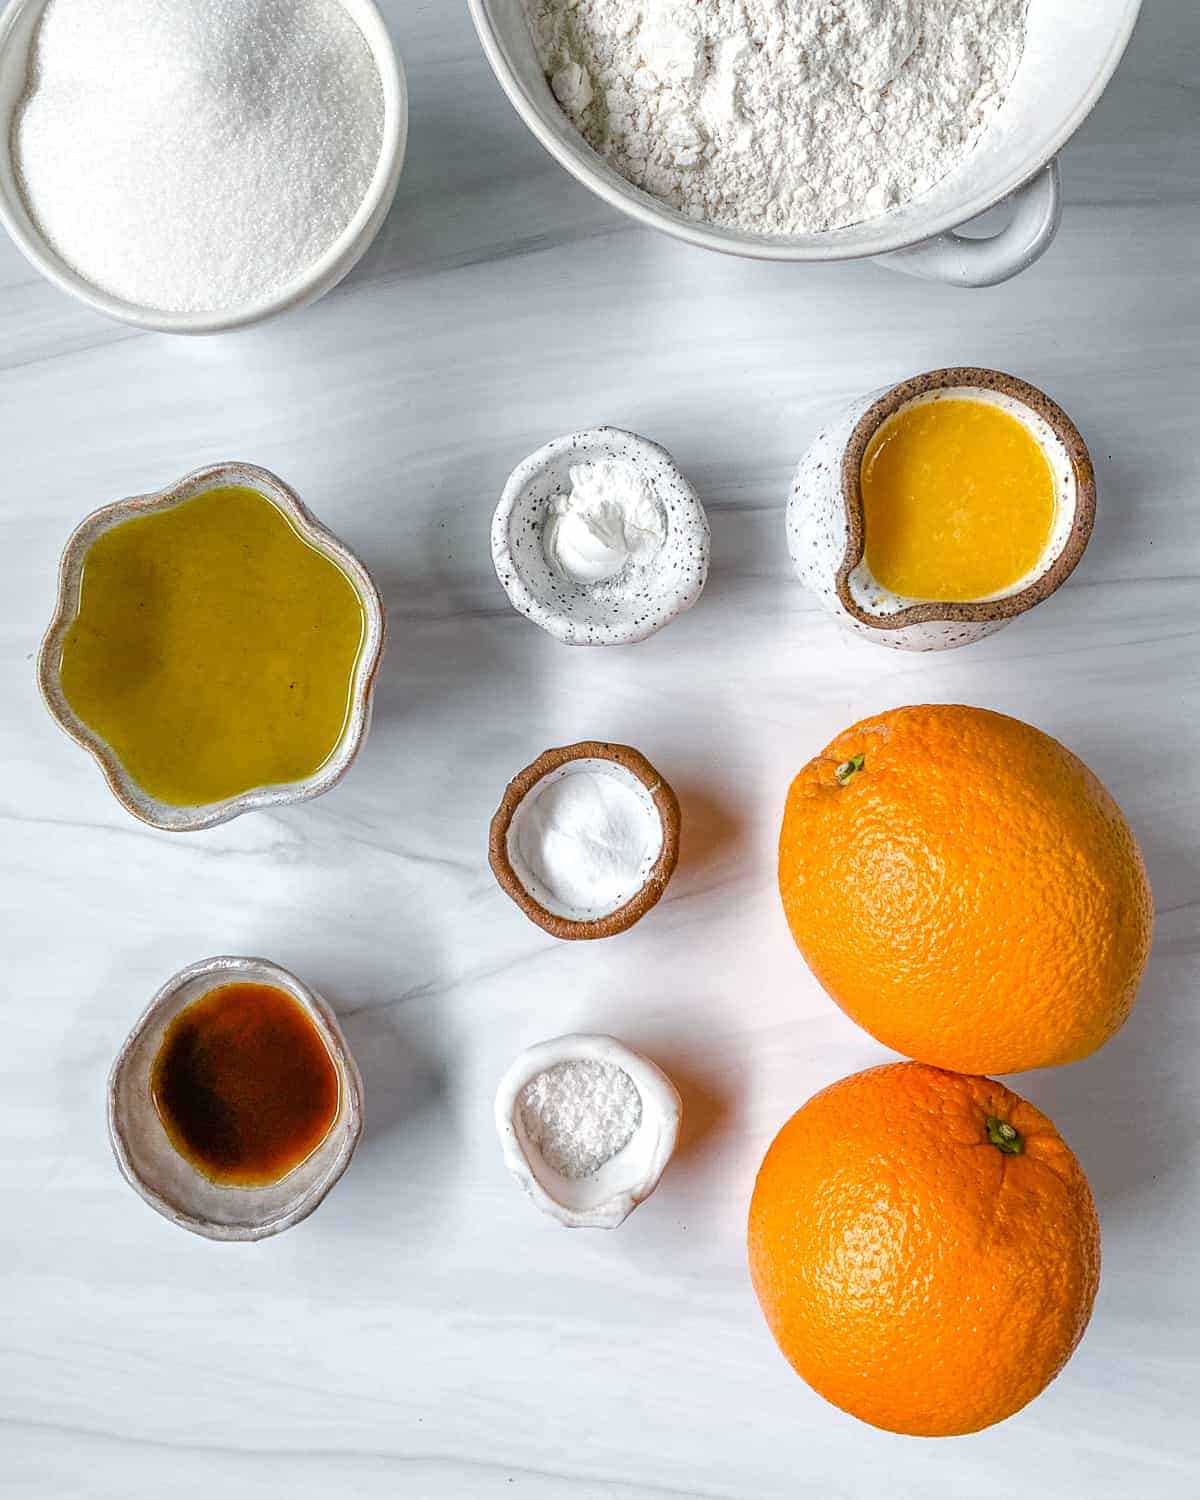 ingredients for Orange Olive Oil Cake against a white background